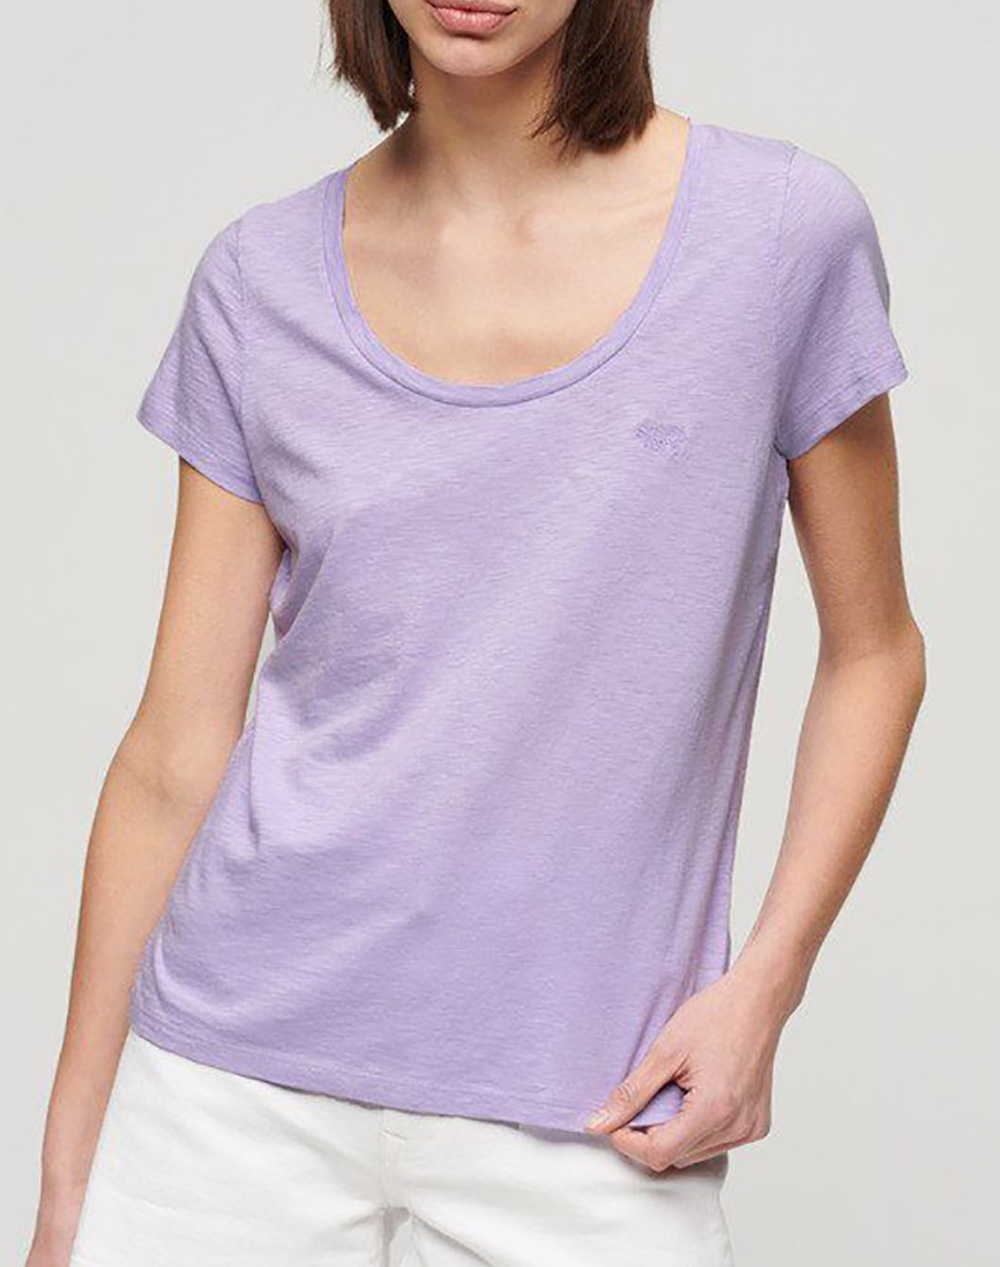 SUPERDRY D2 BOUT SCOOP NECK TEE ΜΠΛΟΥΖΑ ΓΥΝΑΙΚΕΙΟ W1011381A-1KX Lilac 3810ASUPE3400229_XR28297